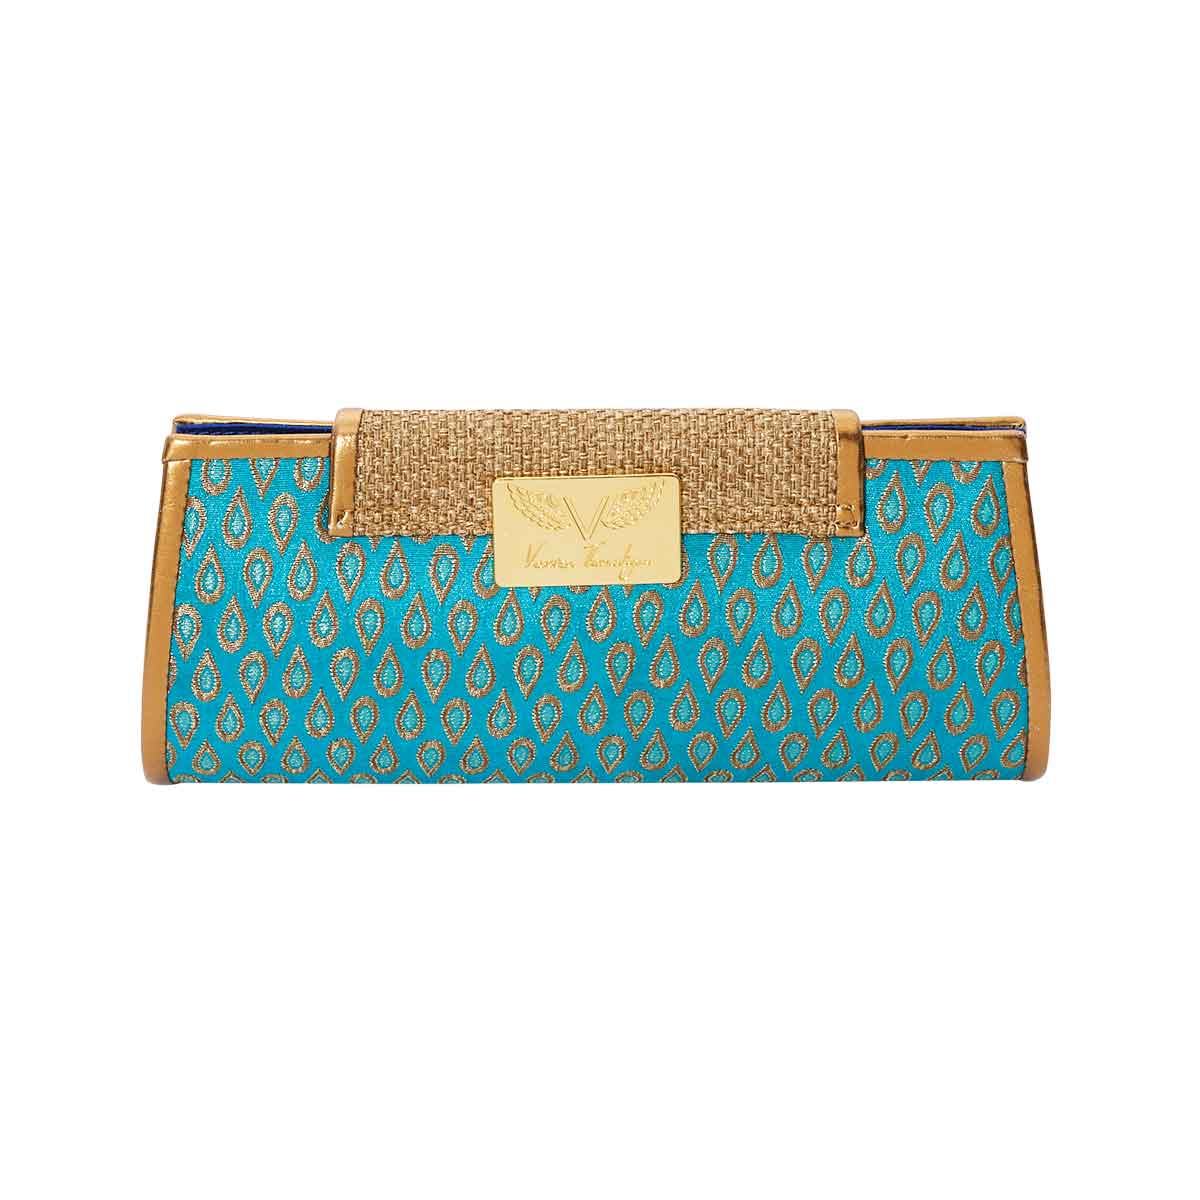 Lakshmi handbag. Turquoise and gold tear drop clutch bag with chain strap. Rani Collection by Veronica Tharmalingam. Back view with logo plaque in gold.